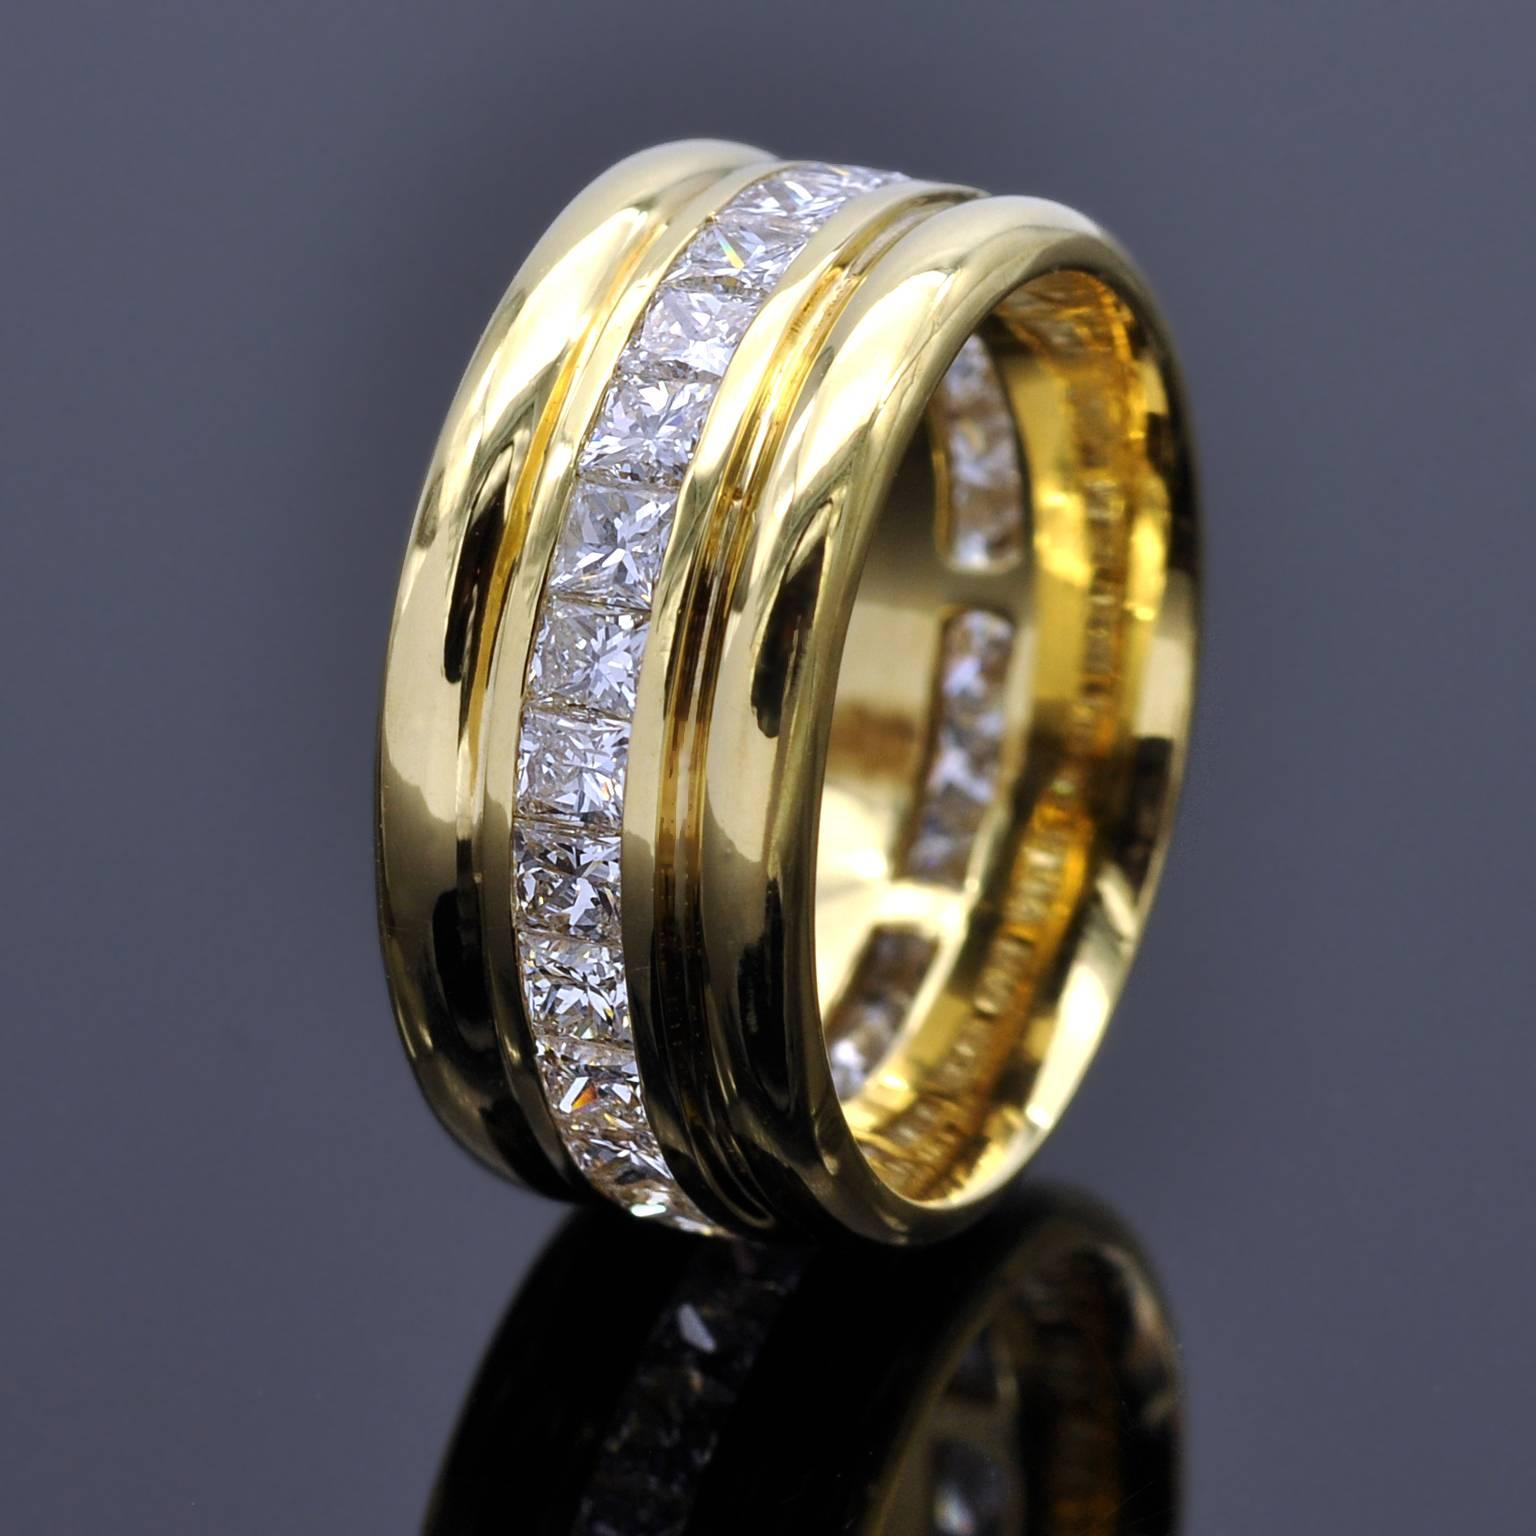 Attractive eternity band ring; the band is 9mm wide (35in) in its midst a line of 28 fine princess cut diamonds weighing approx. 2,4 carats

Ring size: 52 EU,  6 US
French Hallmark